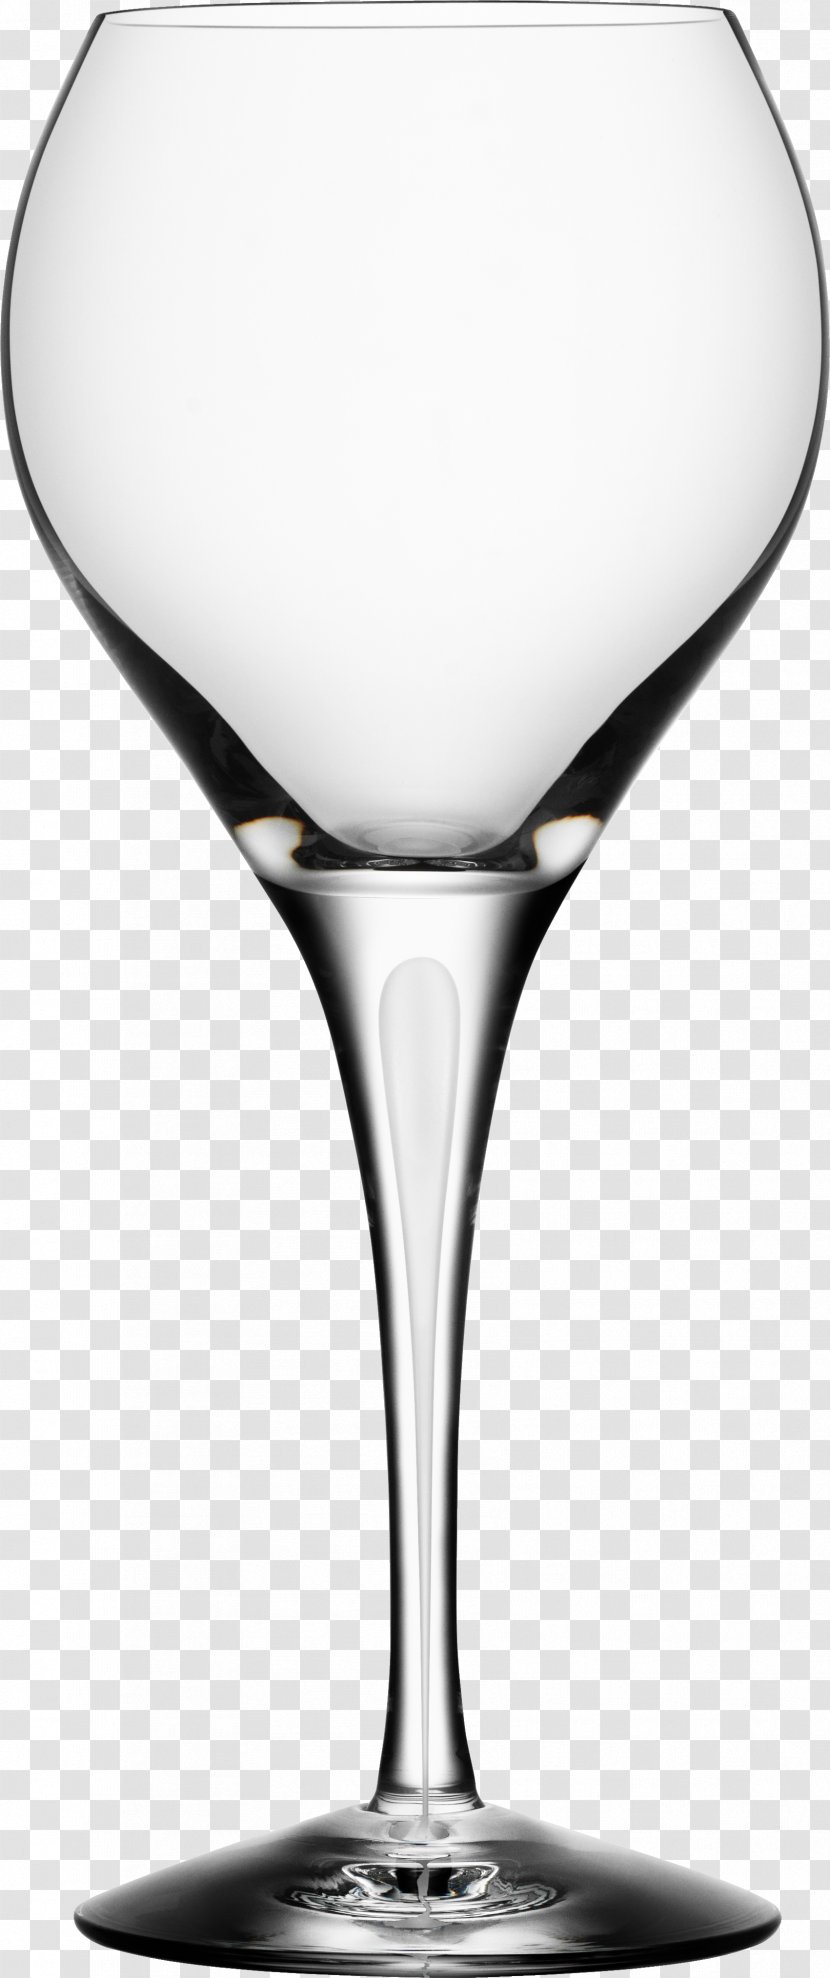 Wine Glass Cocktail Champagne - Beer - Empty Image Transparent PNG